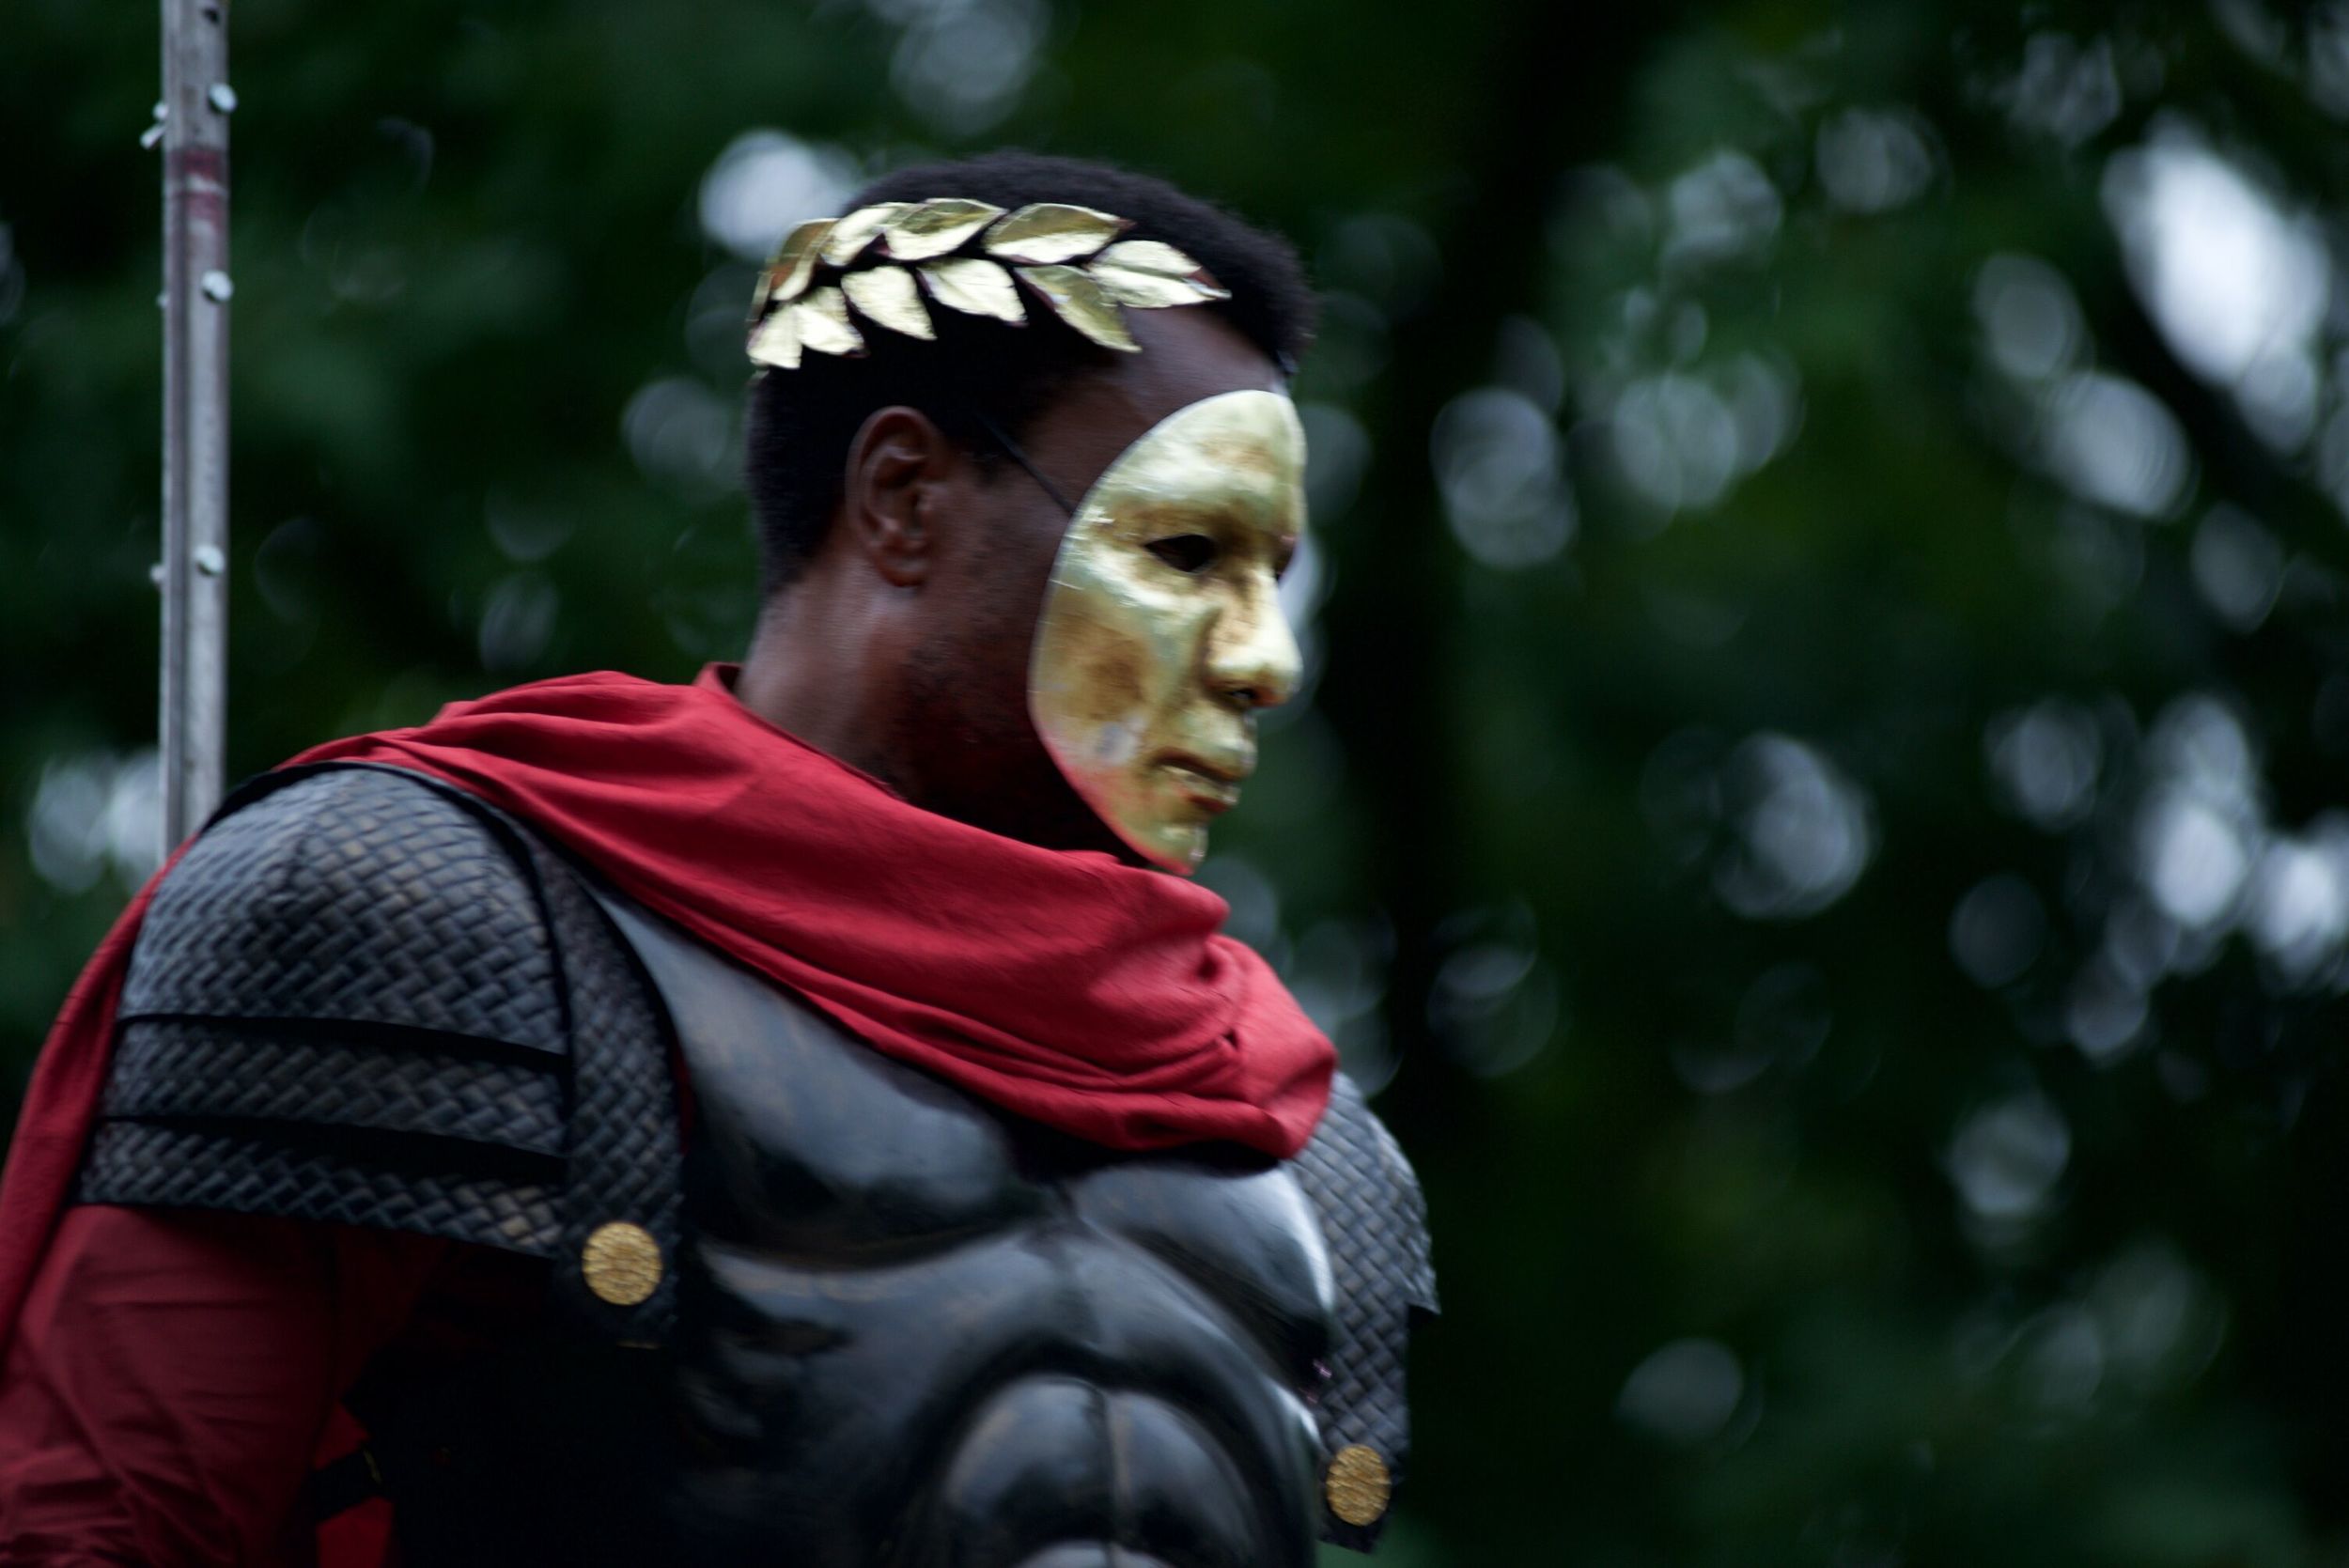   Julius Caesar.  &nbsp;Canadian Stage Shakespeare in High Park 2015. Direction: Estelle Shook. Costume Design: Michelle Tracey. Photo by: Lyon Smith  